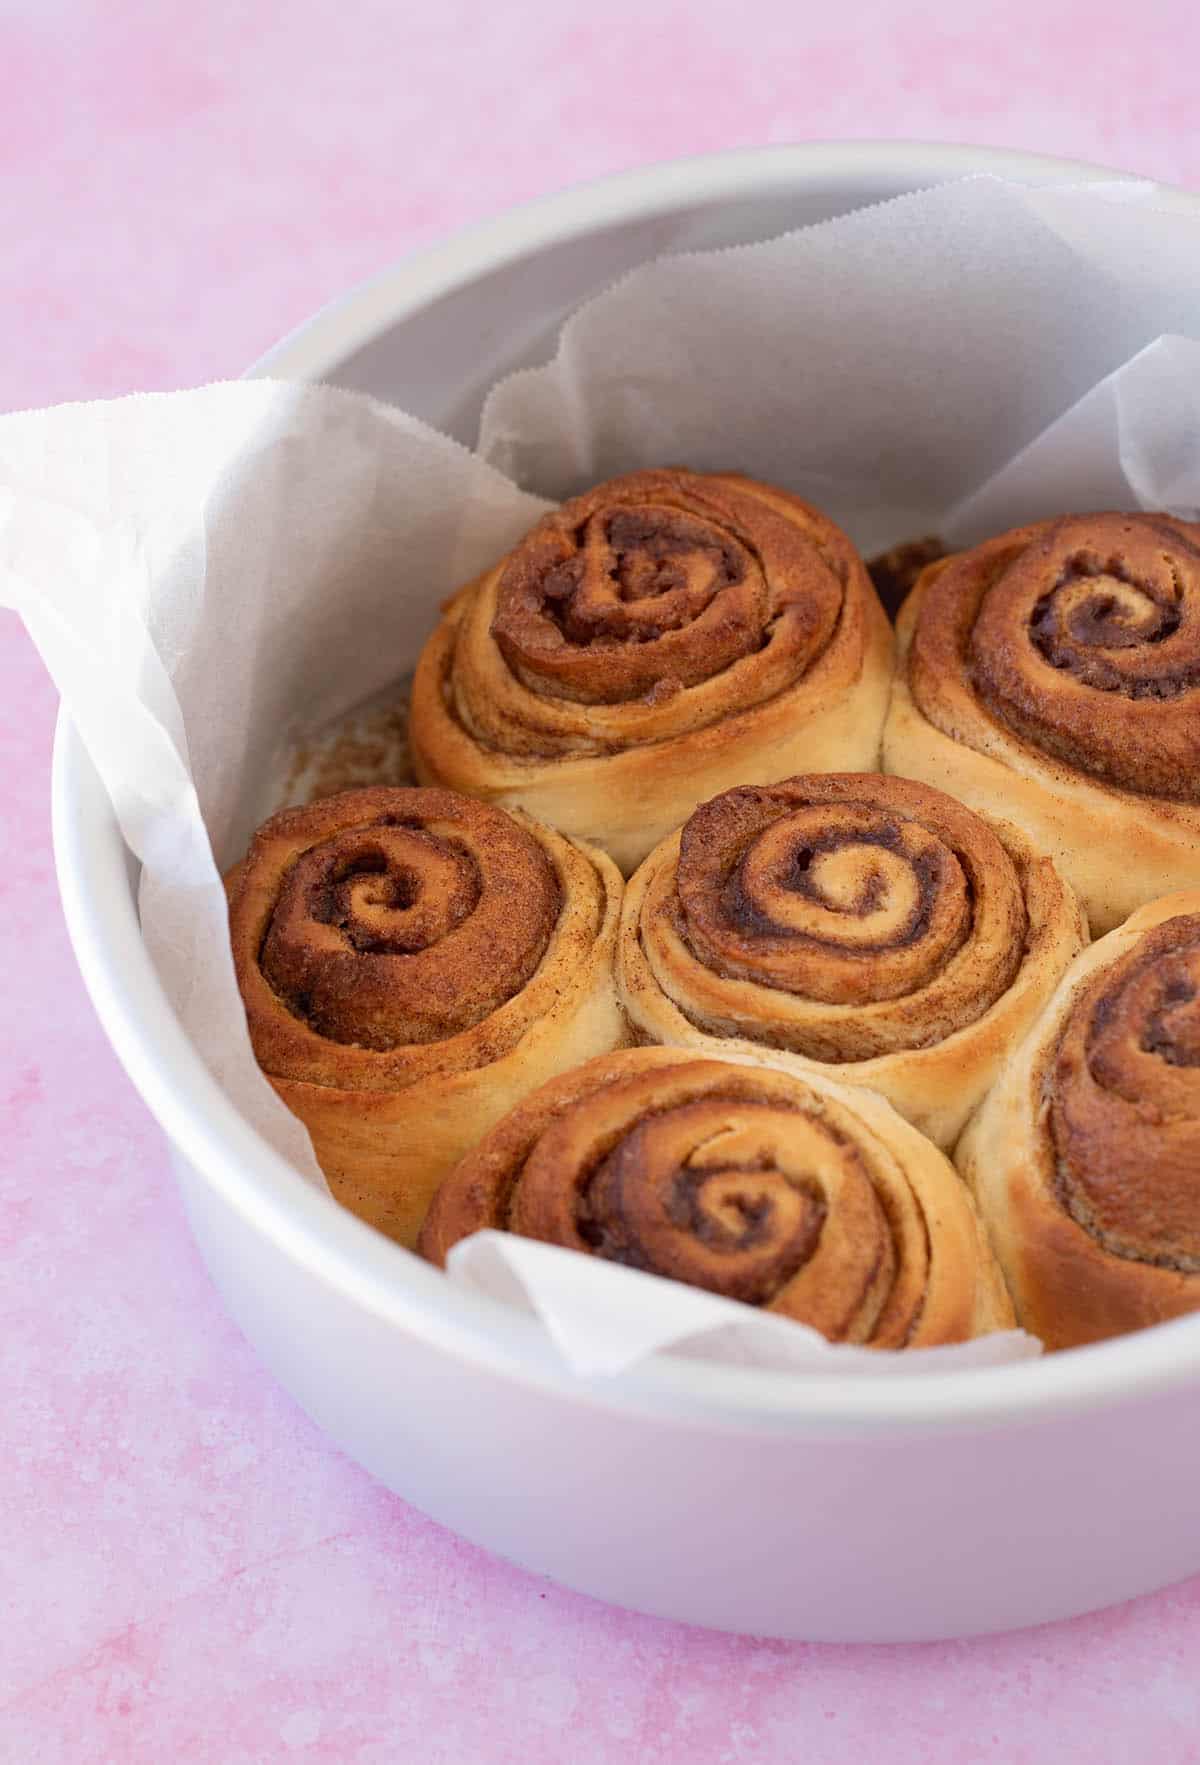 A batch of fresh cinnamon rolls from the oven